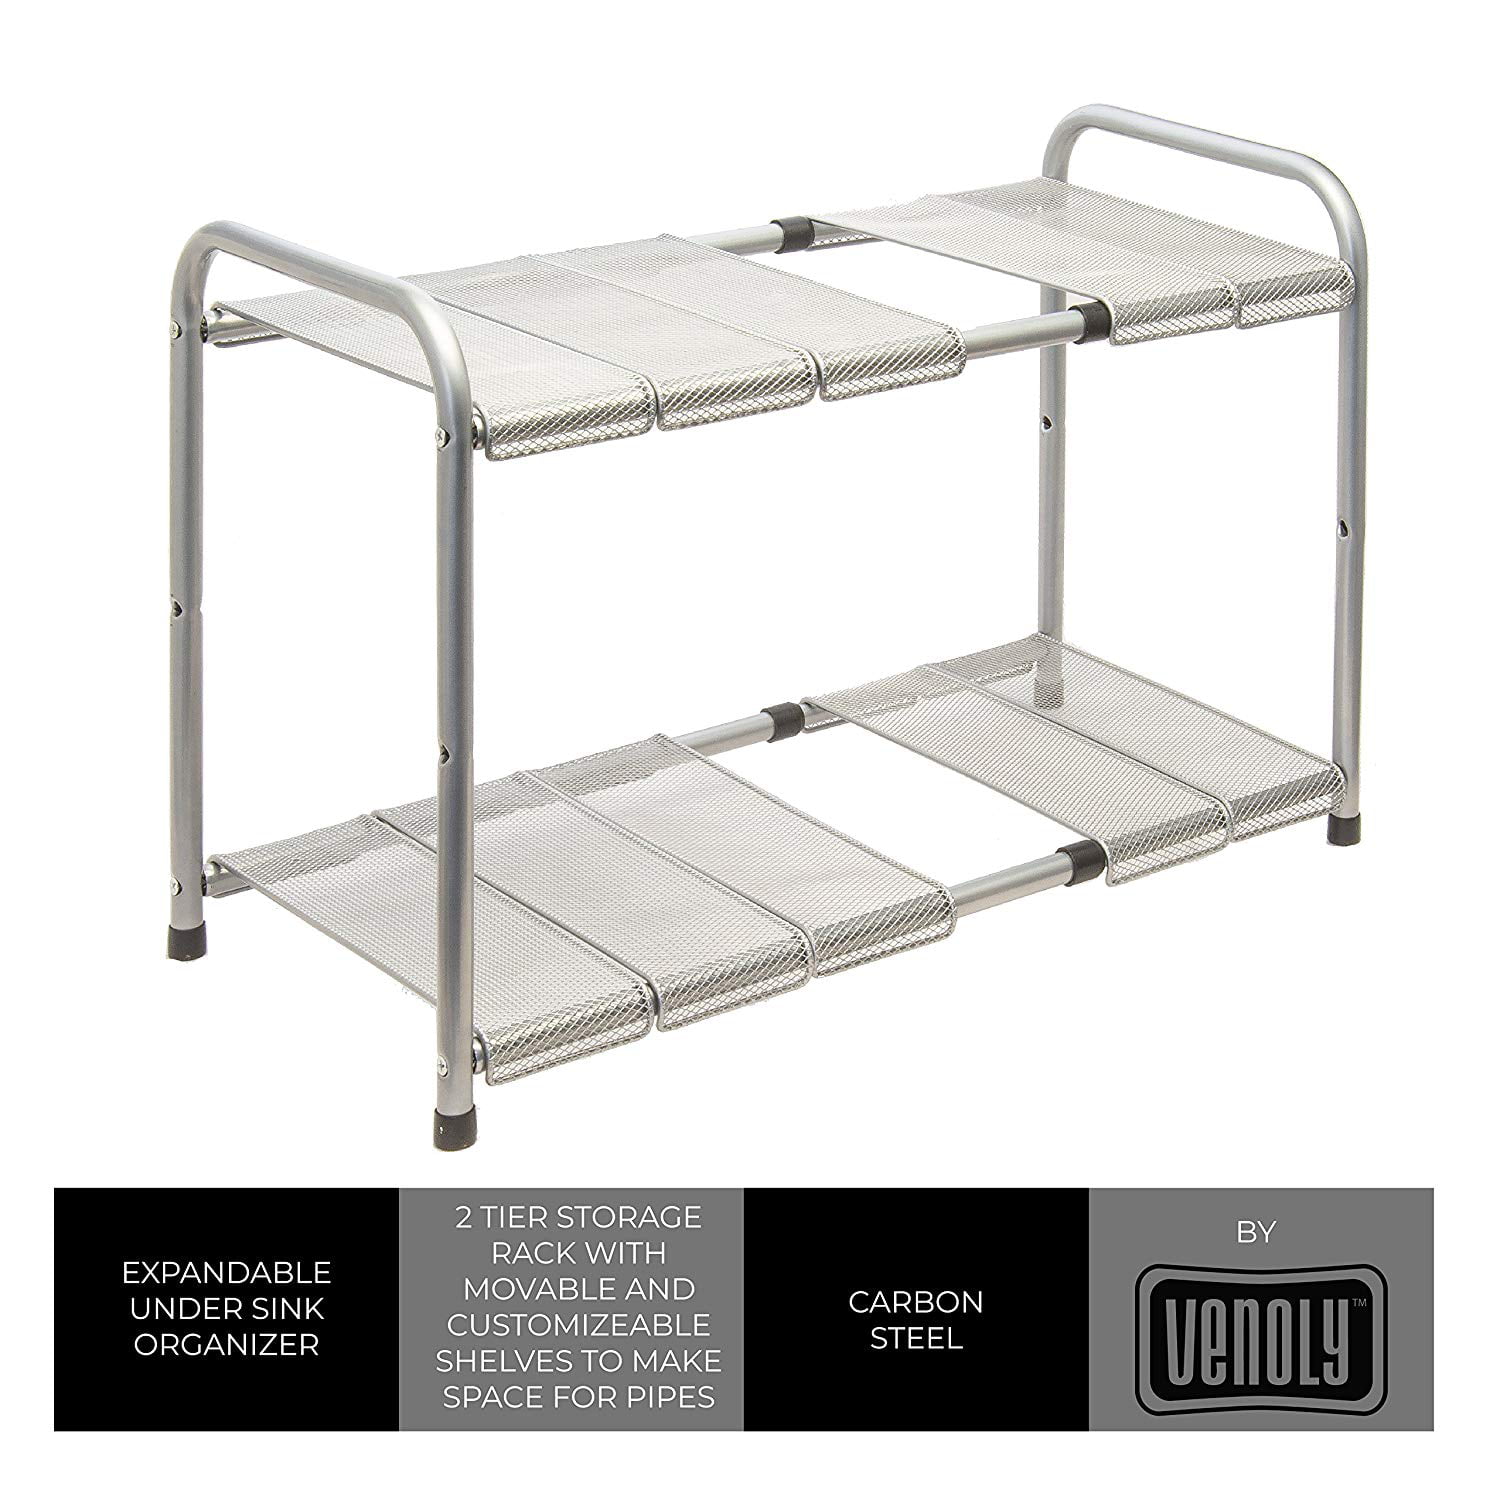 Expandable Under Sink Organizer - 2 Tier Storage Rack with Movable and Customizeable Shelves to Make Space for Pipes - Carbon Steel - by Venoly